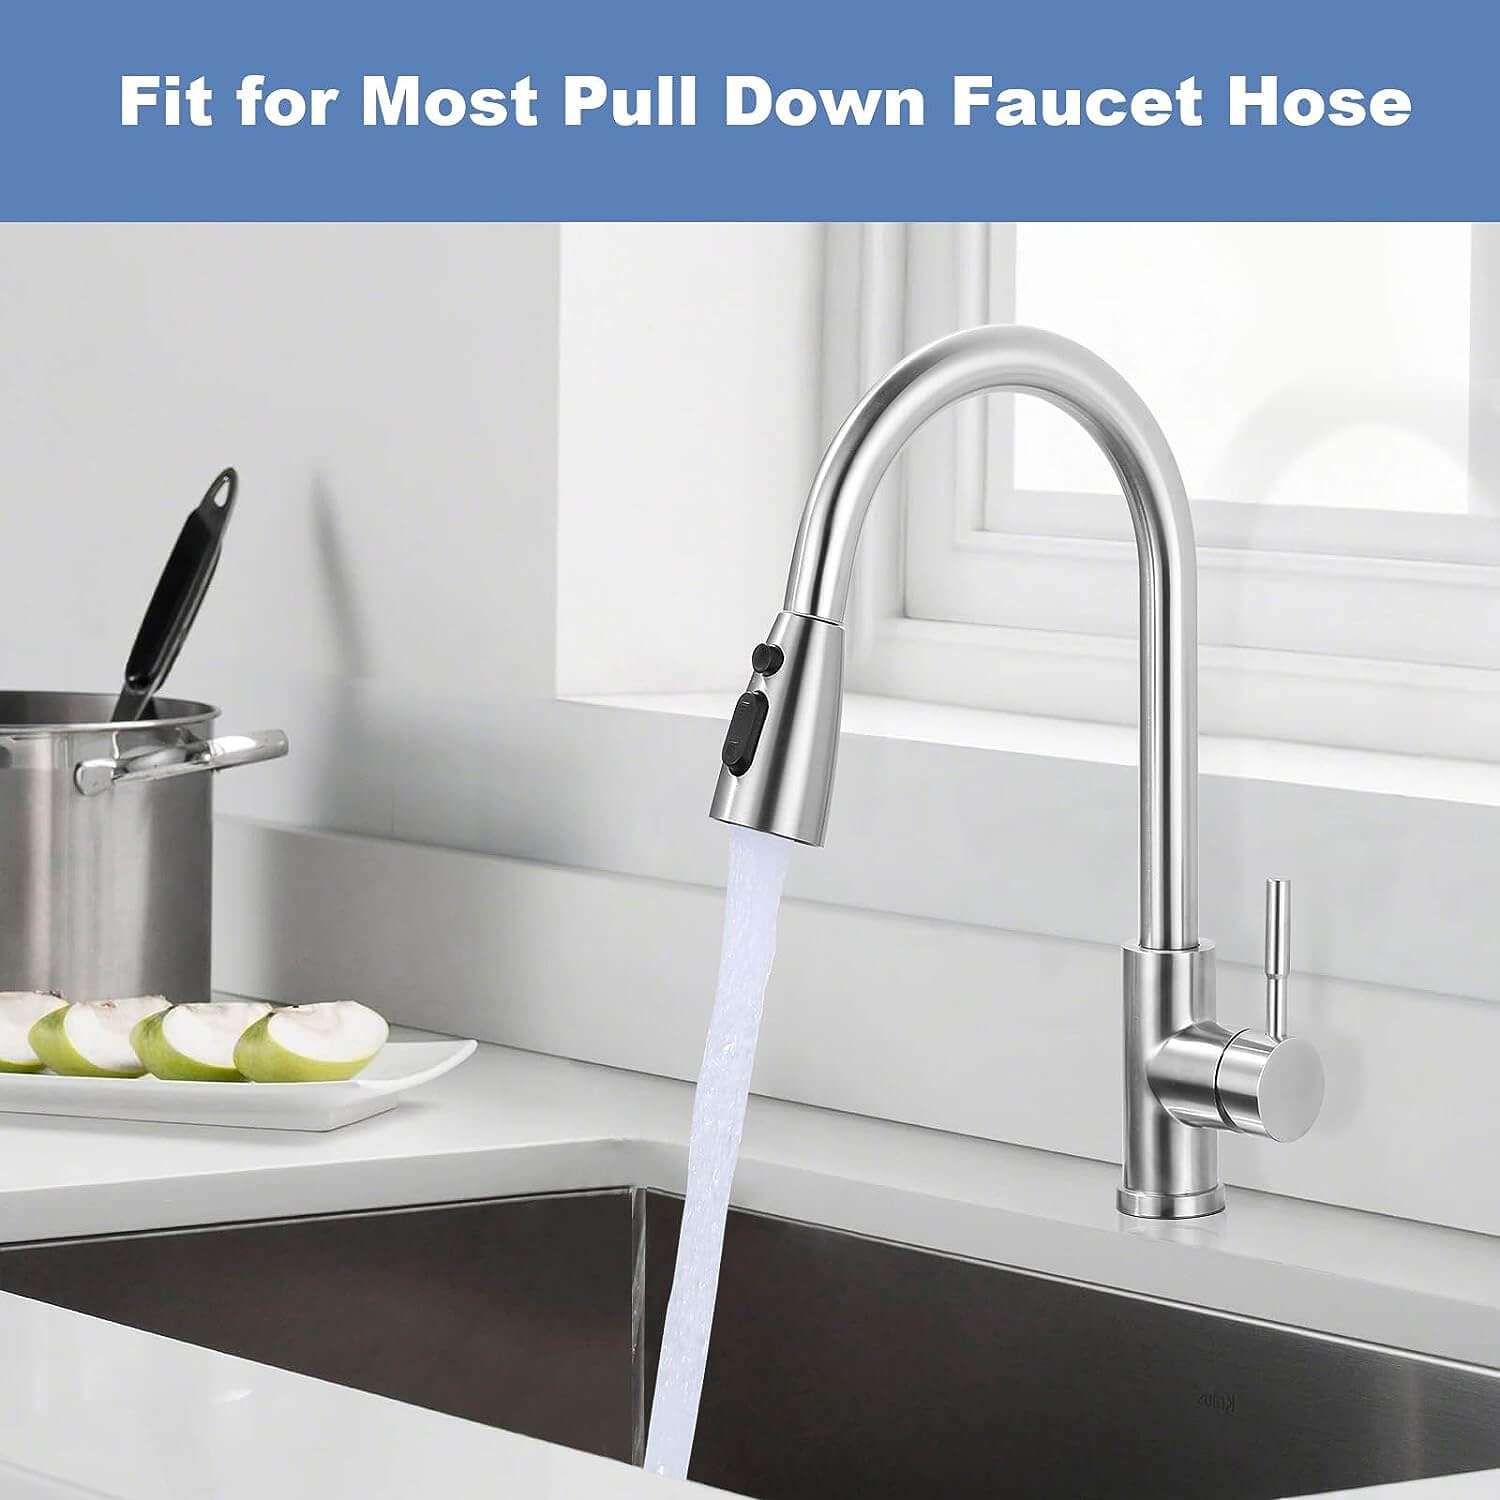 wowow brushed nickel kitchen sink faucet head 4